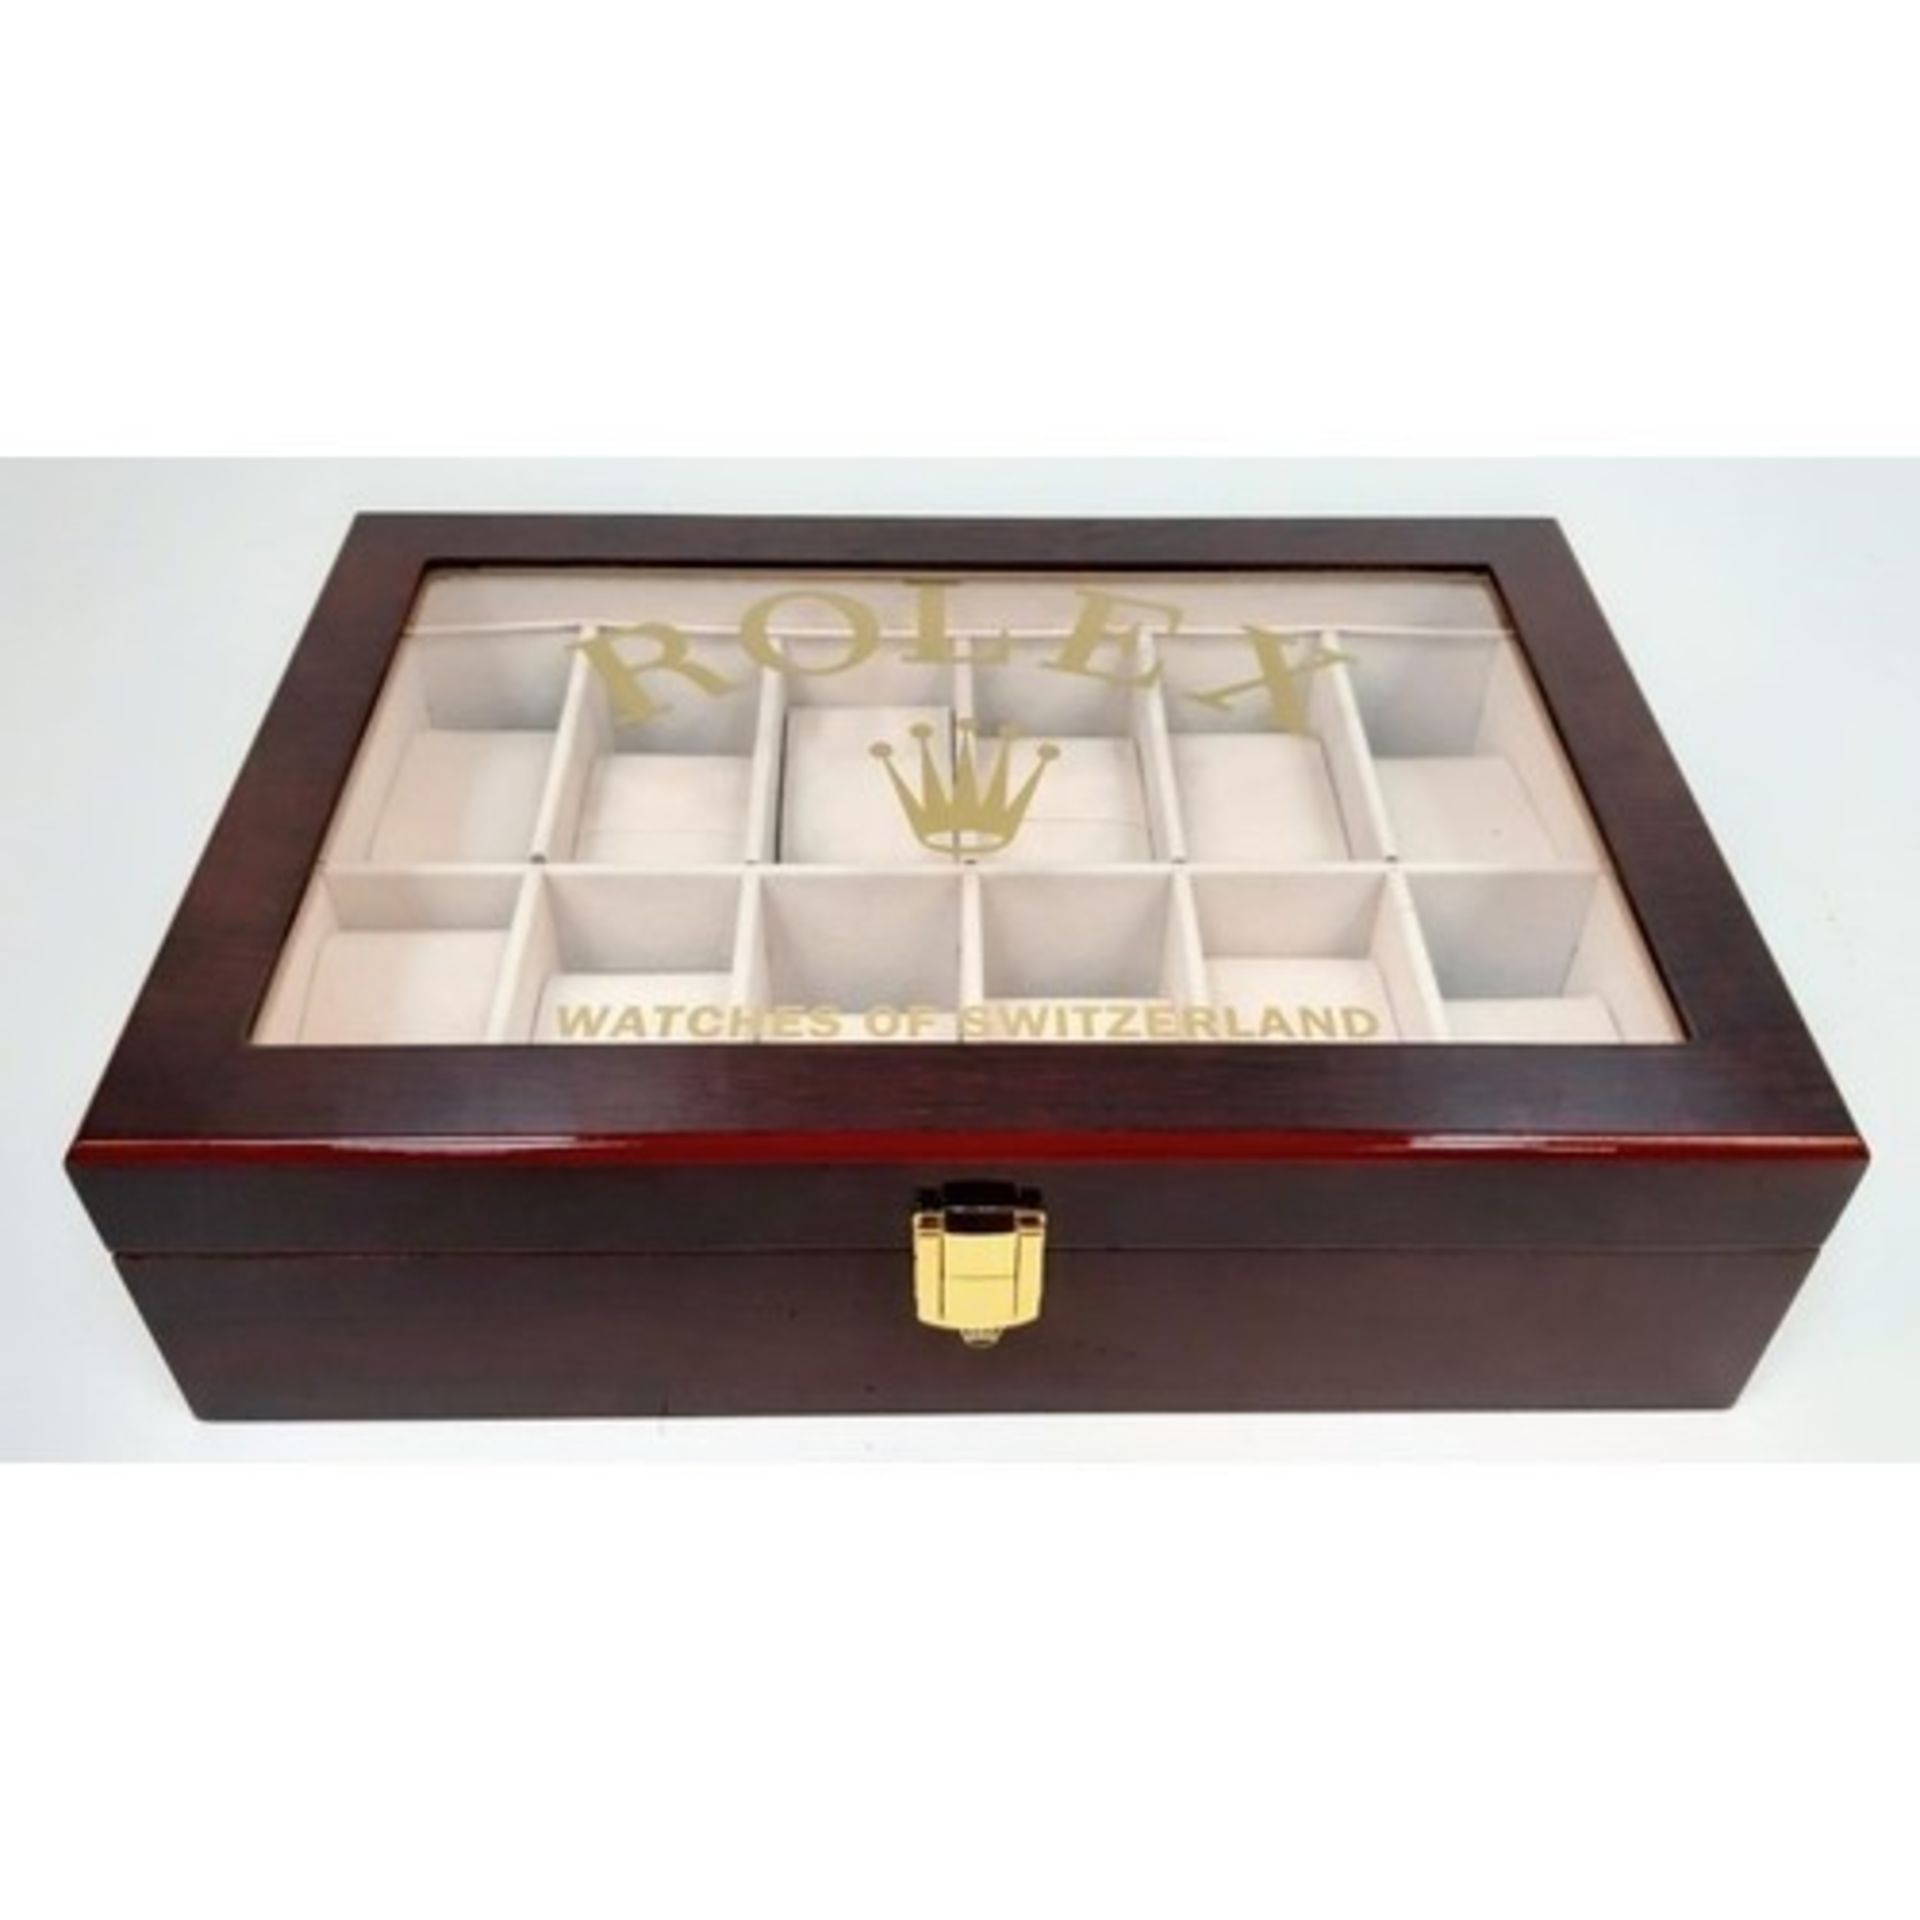 A 12 Watch Display Case - Perfect for Rolex or any premium brand - Polished veneer exterior. Plush